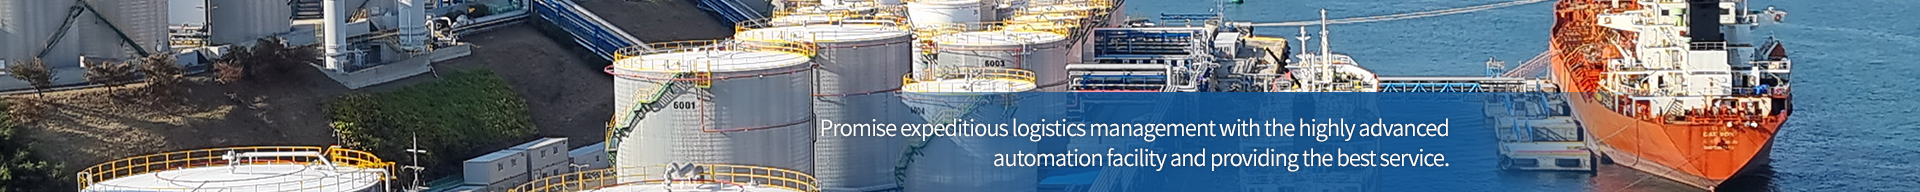 Promise expeditious logistics management with the highly advanced automation facility and providing the best service